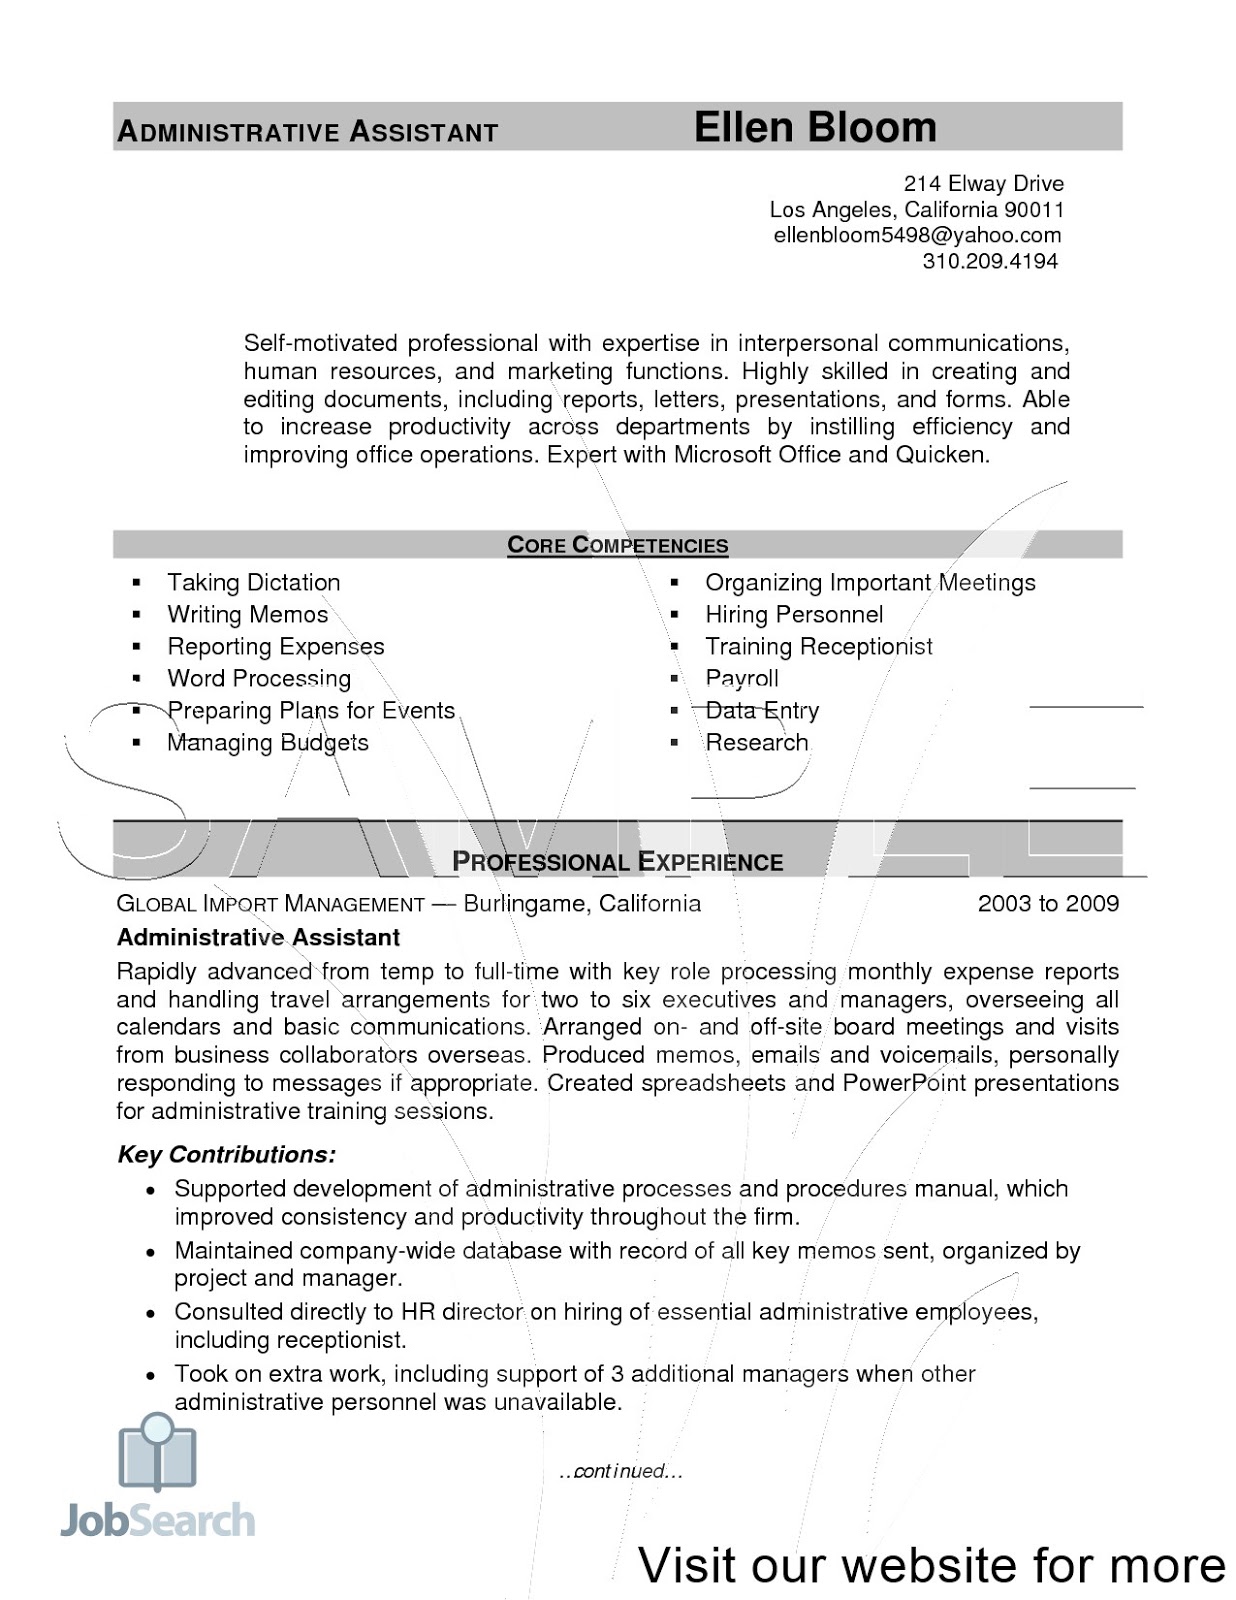 medical assistant example resume 2020 certified medical assistant resume example medical office assistant resume example